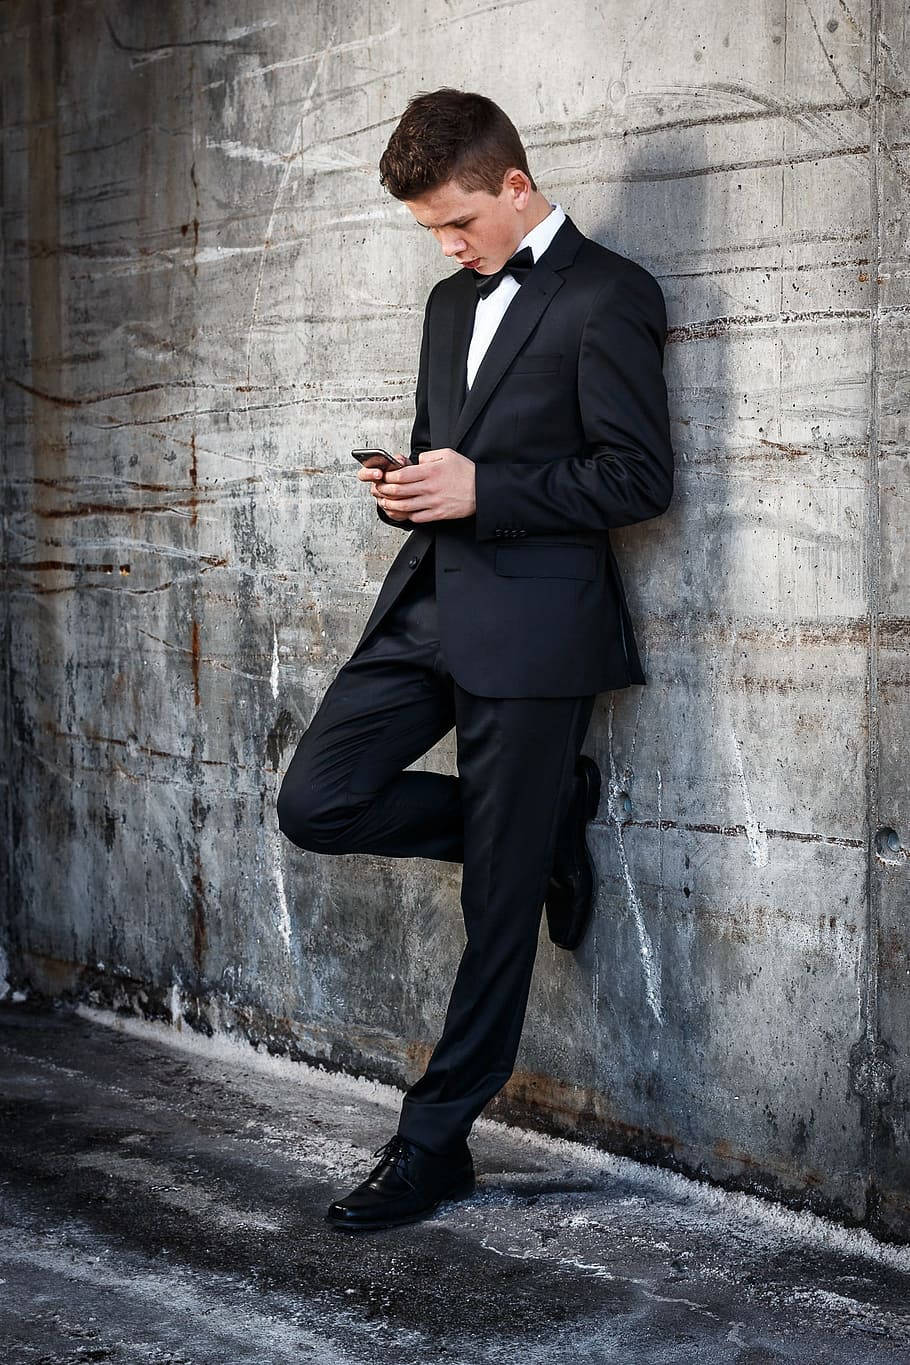 Guy In Tuxedo Against A Wall Background